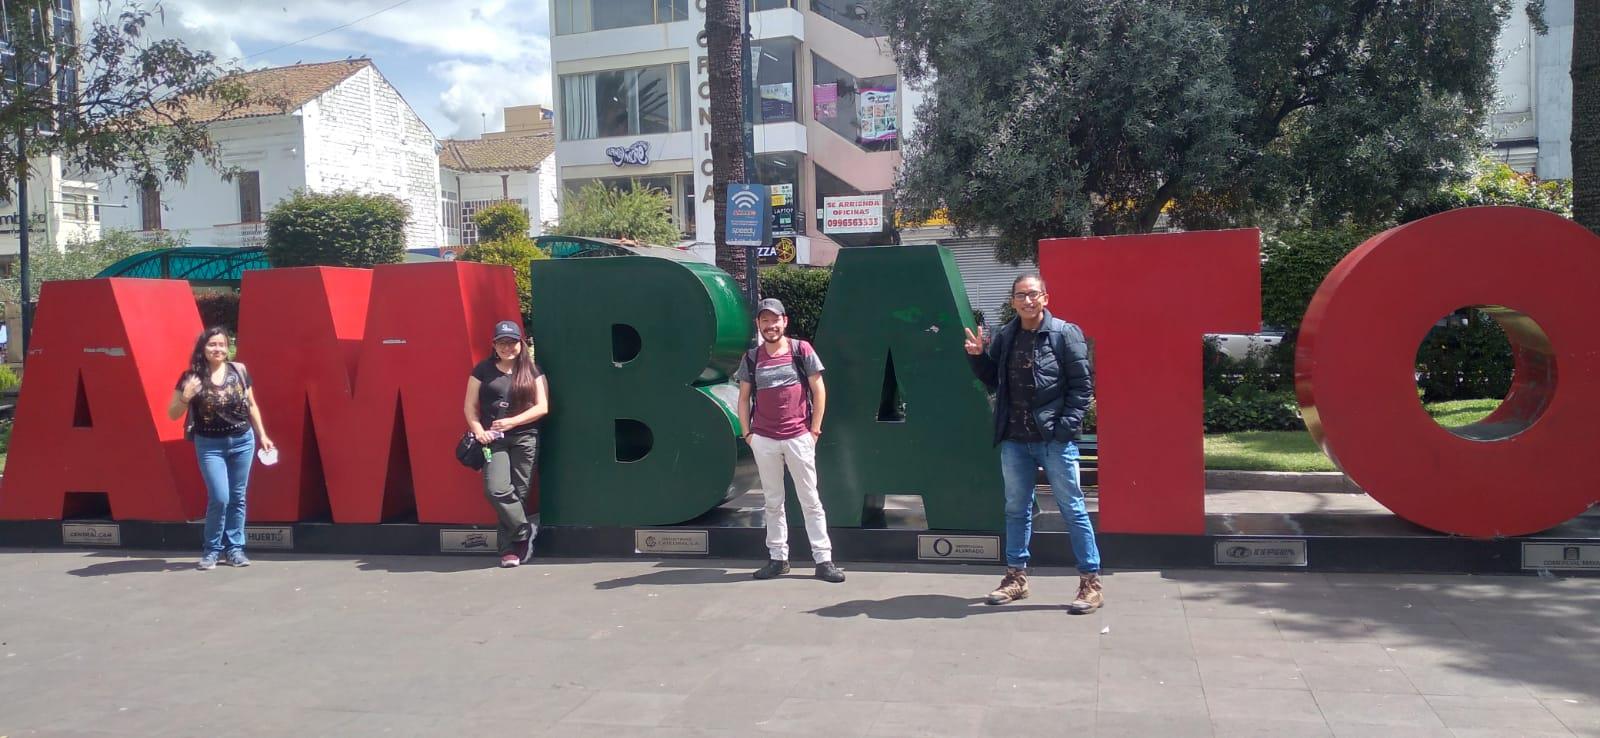 Excursion to Ambato: Land of Fruits and Flowers